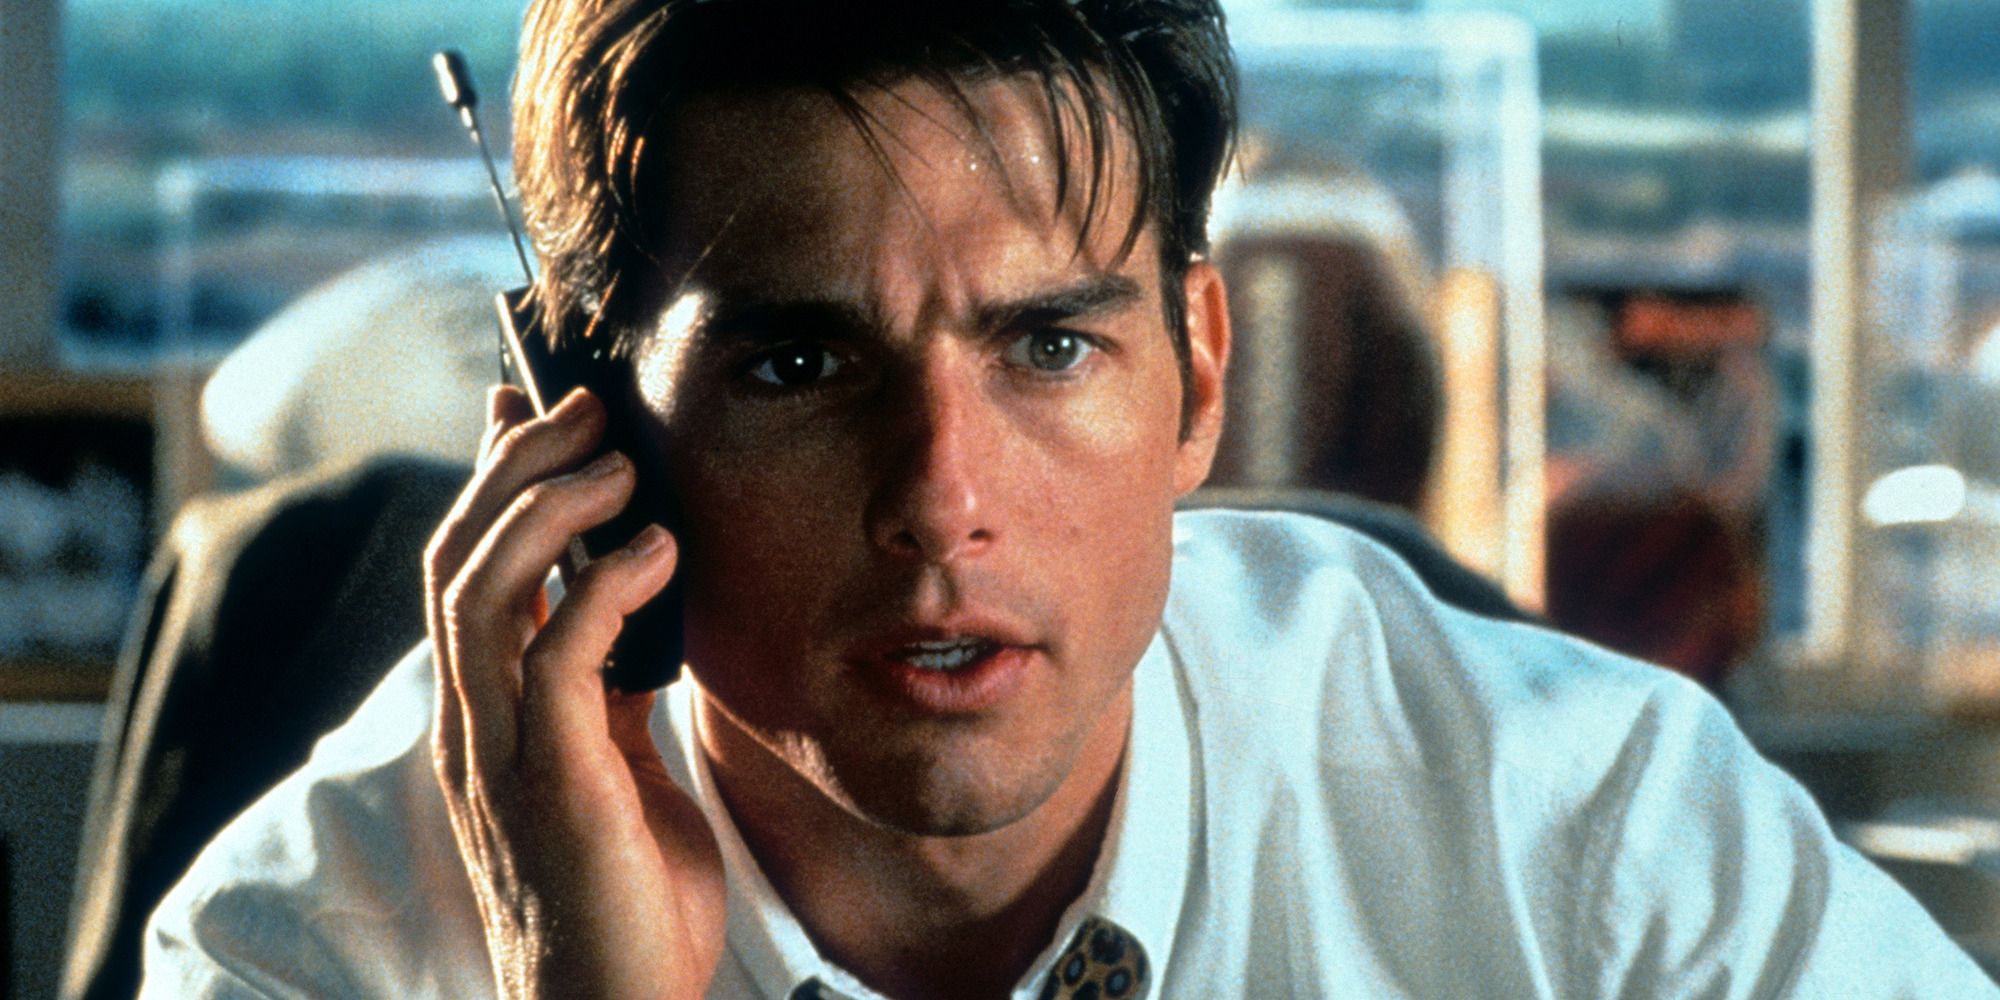 Tom Cruise in 'Jerry Maguire' on the phone in the office